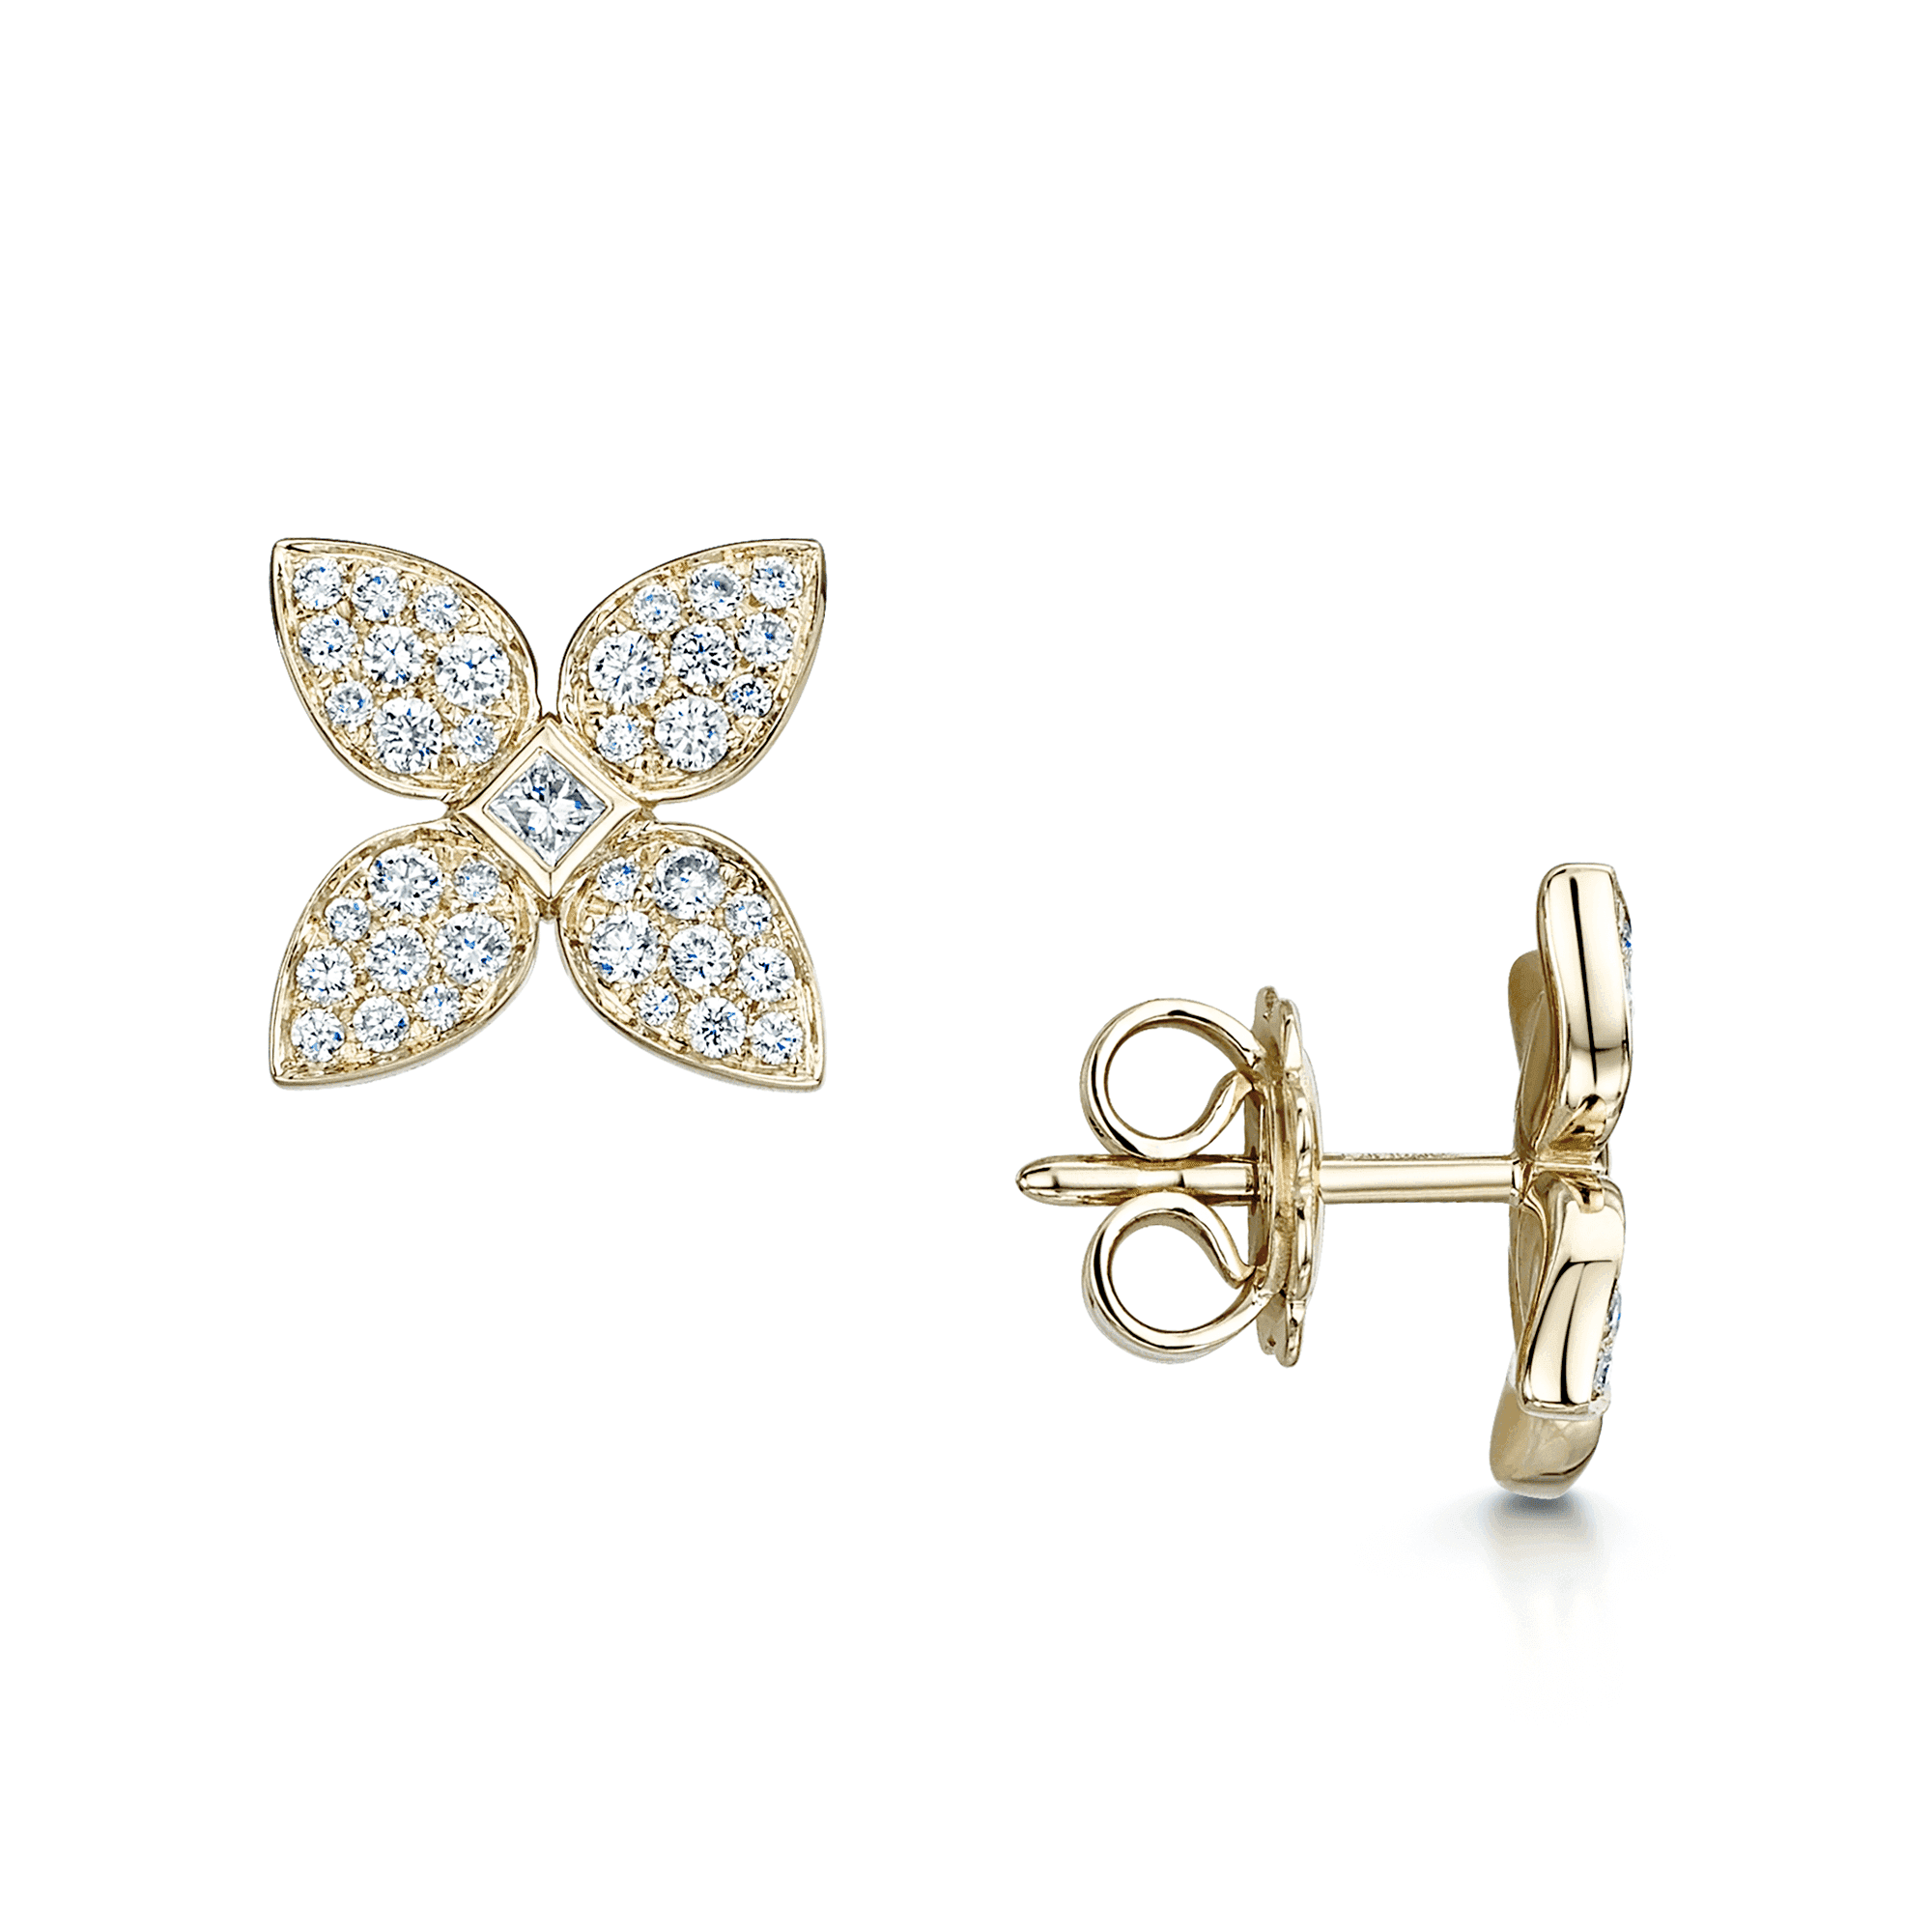 18ct Yellow Gold Flower Stud Earrings With Diamond Pave Set Petals